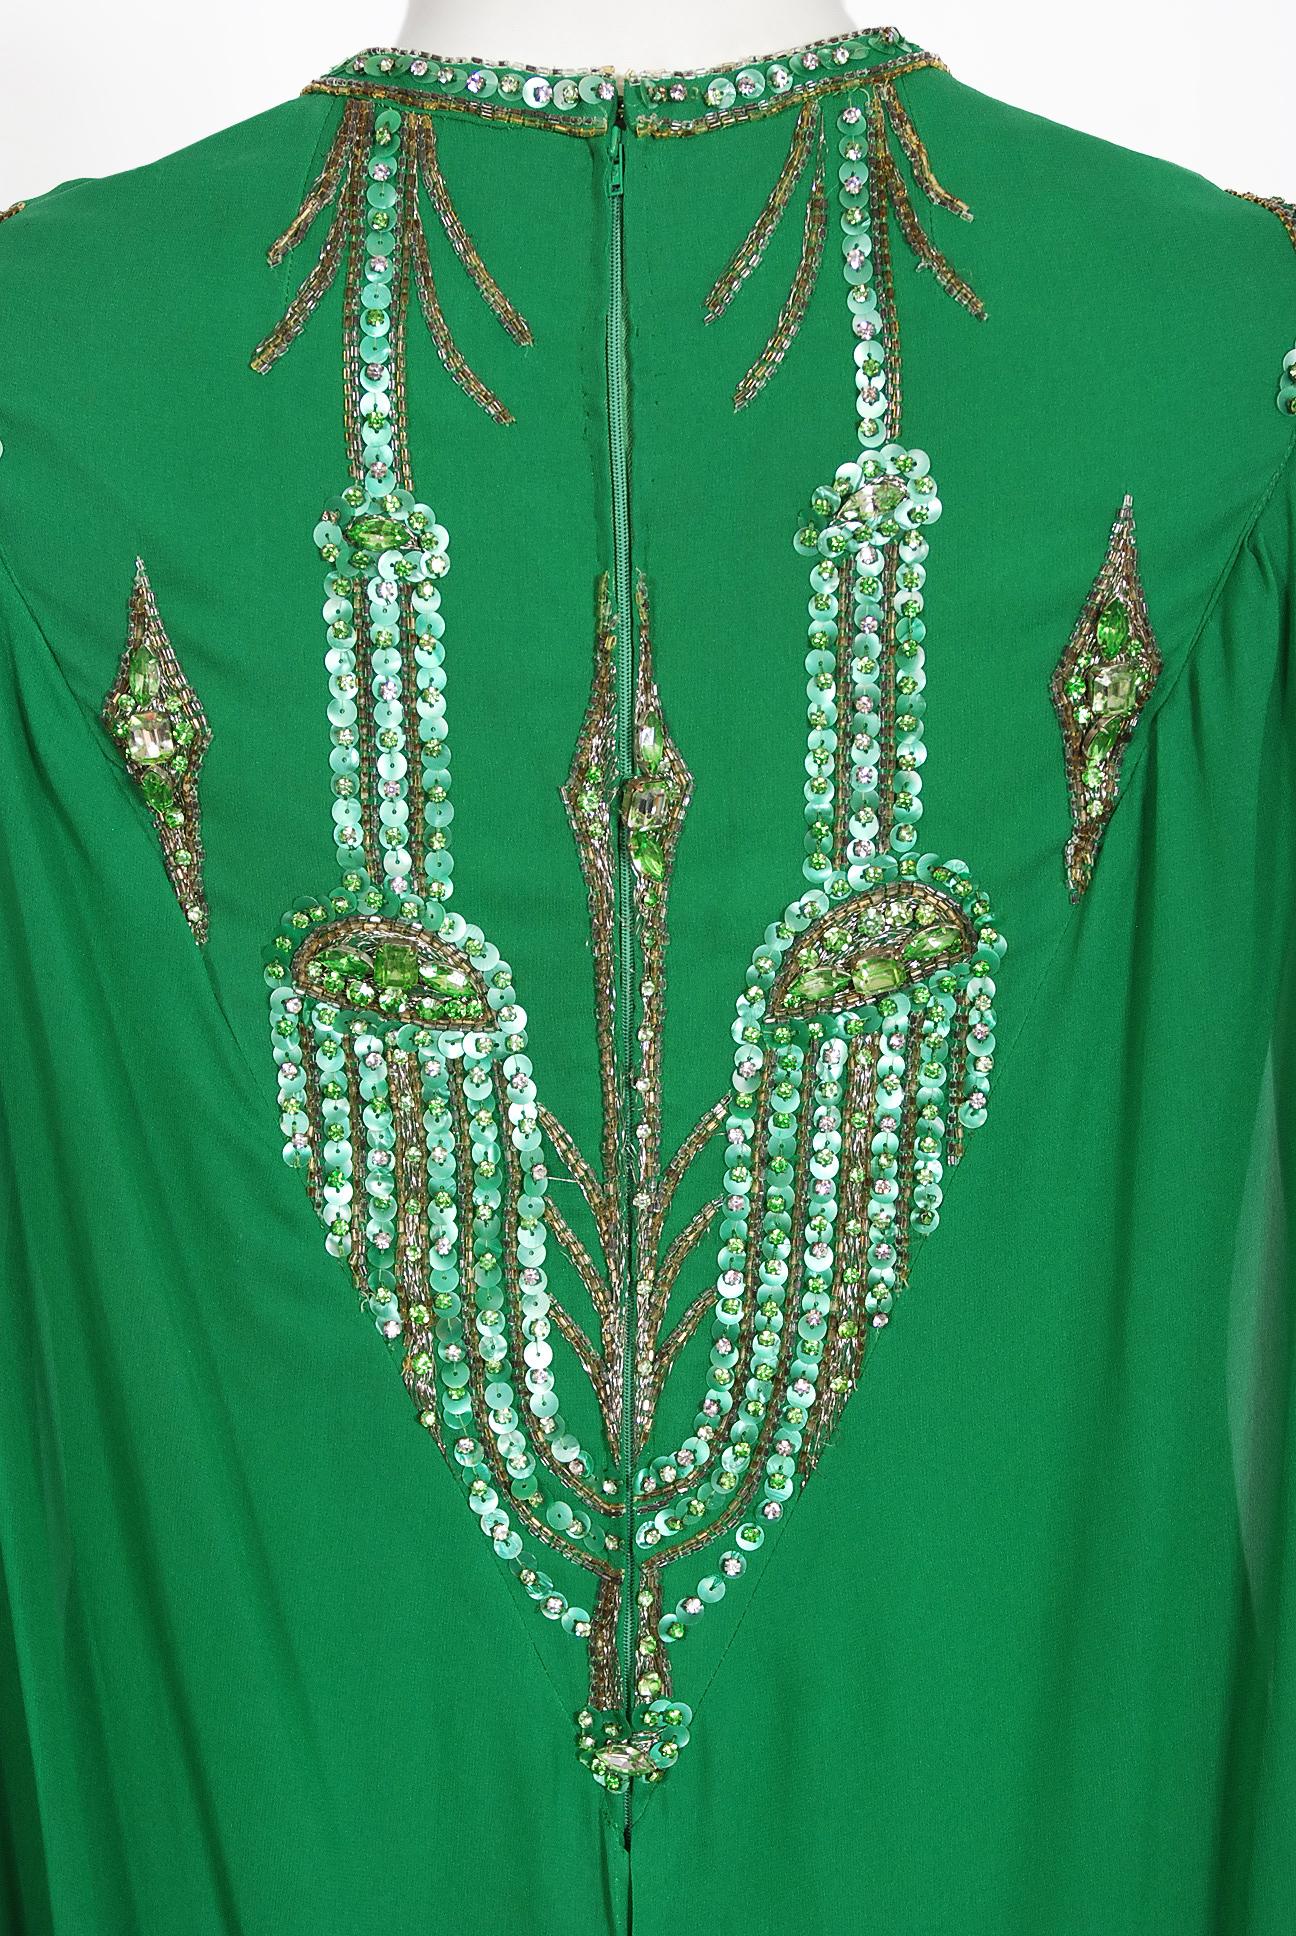 Vintage 1965 Pierre Cardin Haute Couture Beaded Green Silk Chiffon Caftan Gown For Sale 4